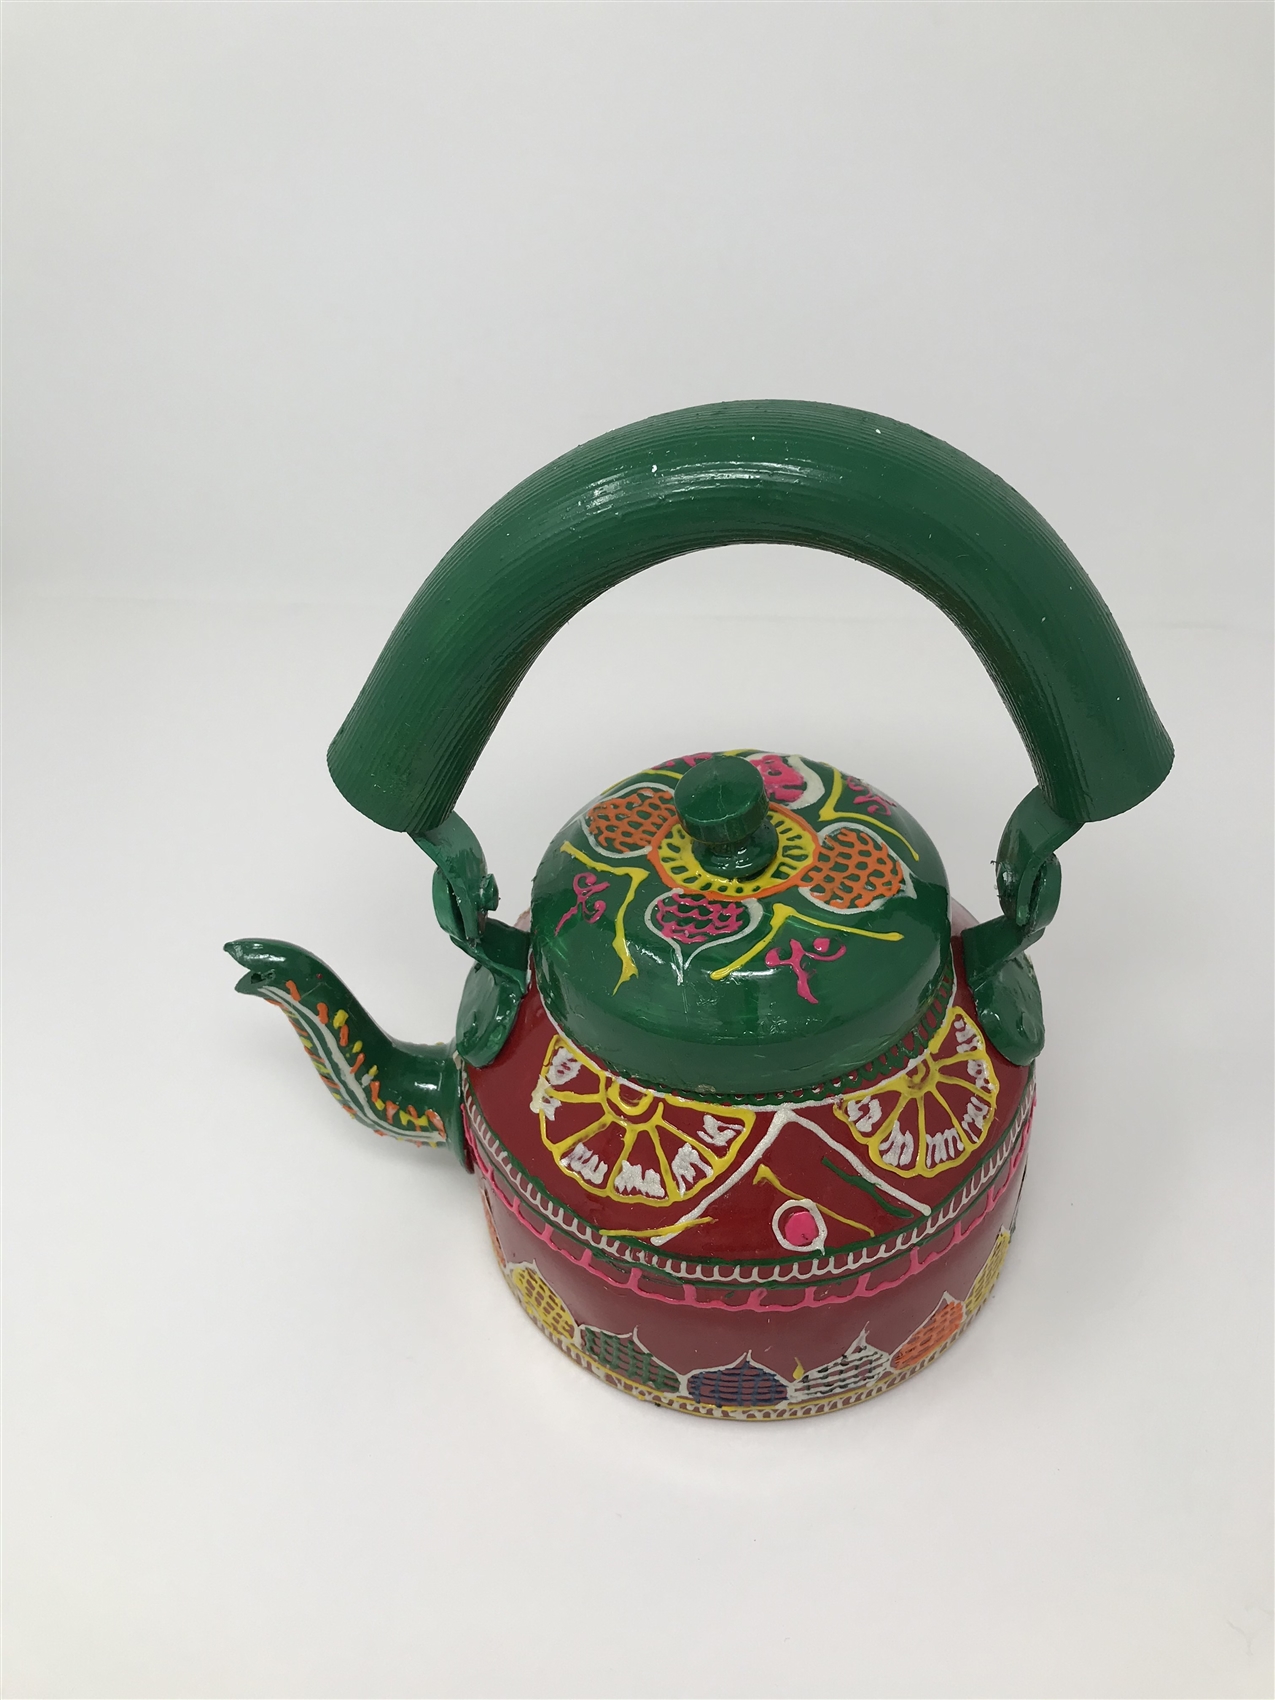 Indian Hand Painted Teapot, Tea Kettle 1 Ltr, Jute Stand and 6